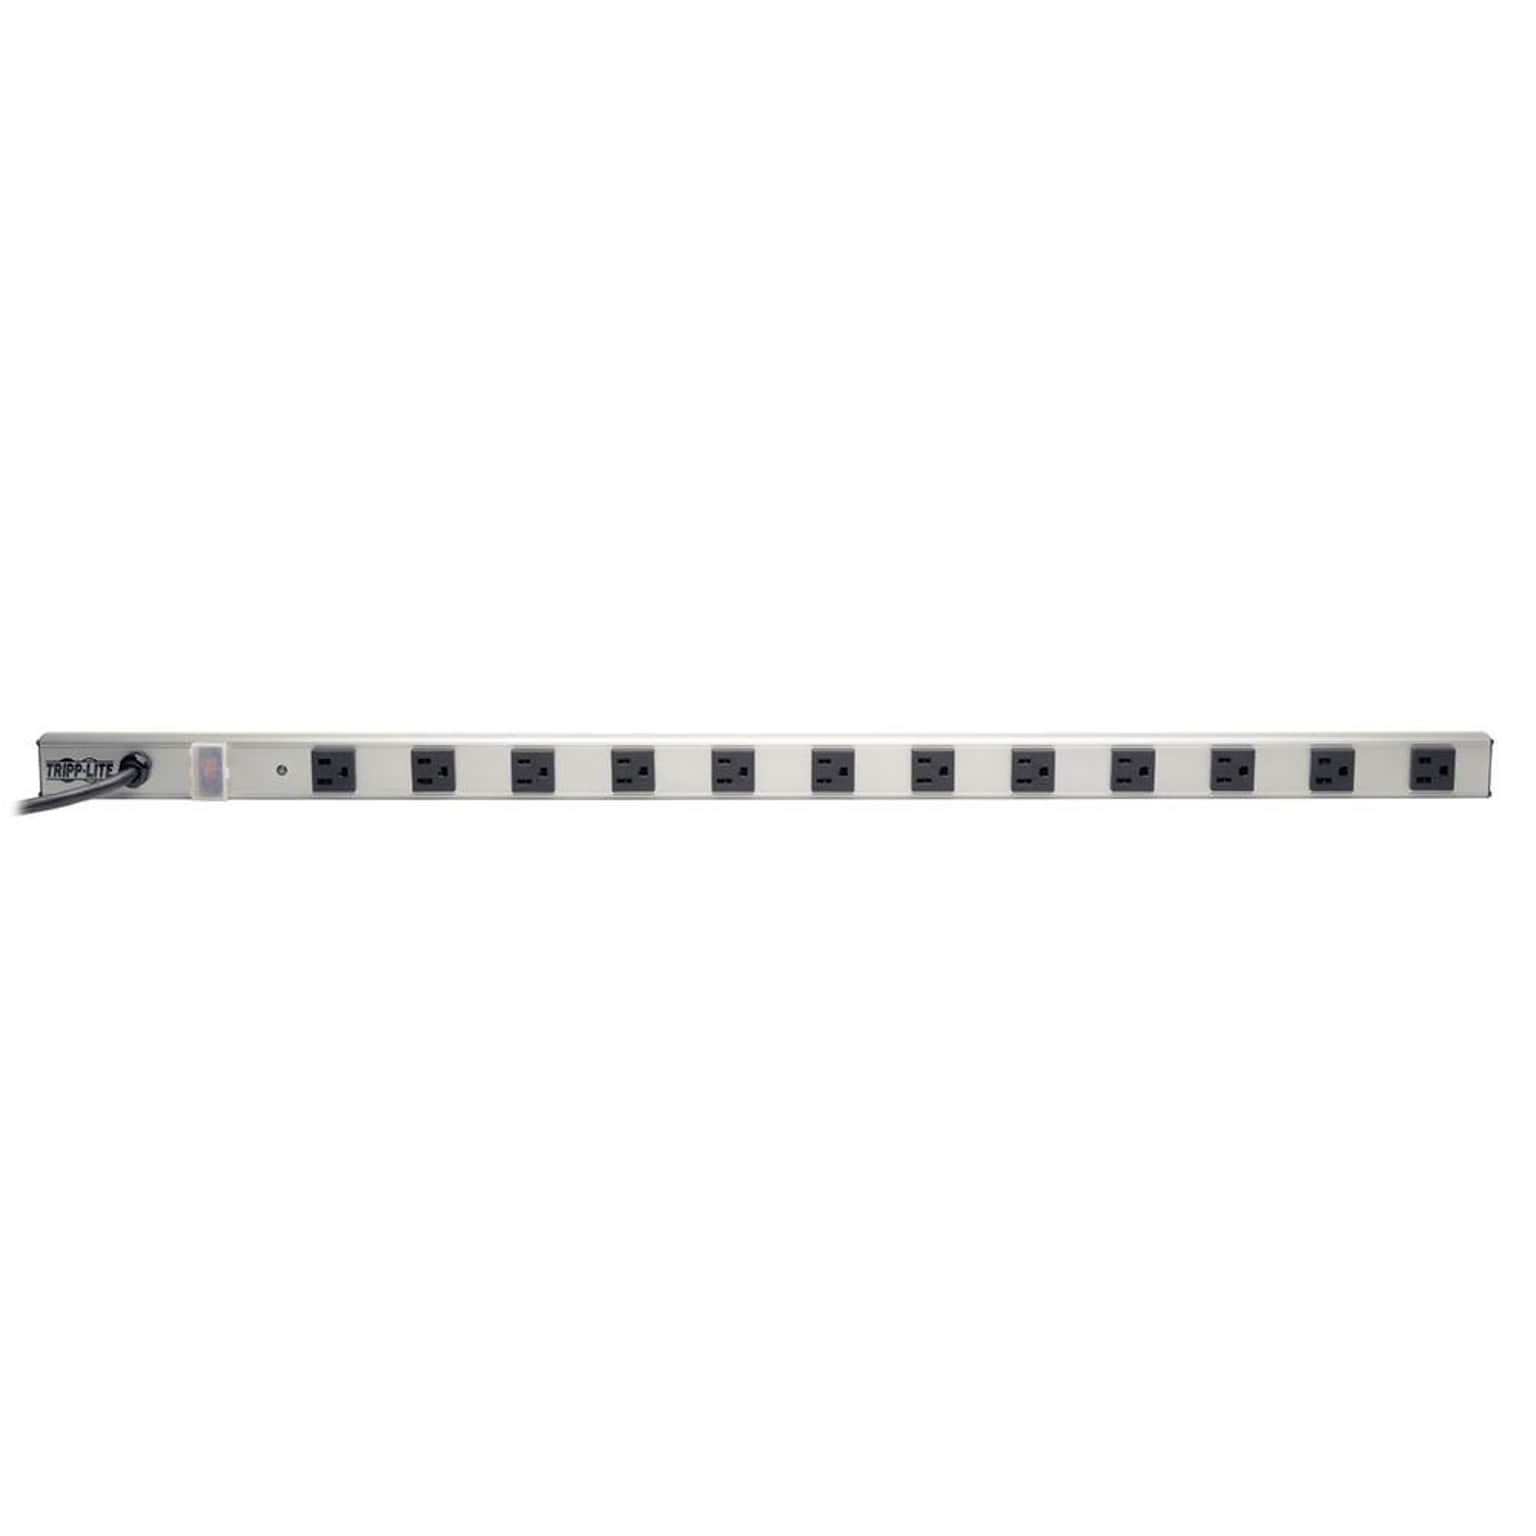 Tripp Lite 15 12-Outlet Power Strip with Surge Protection; Black/Gray (SS3612)